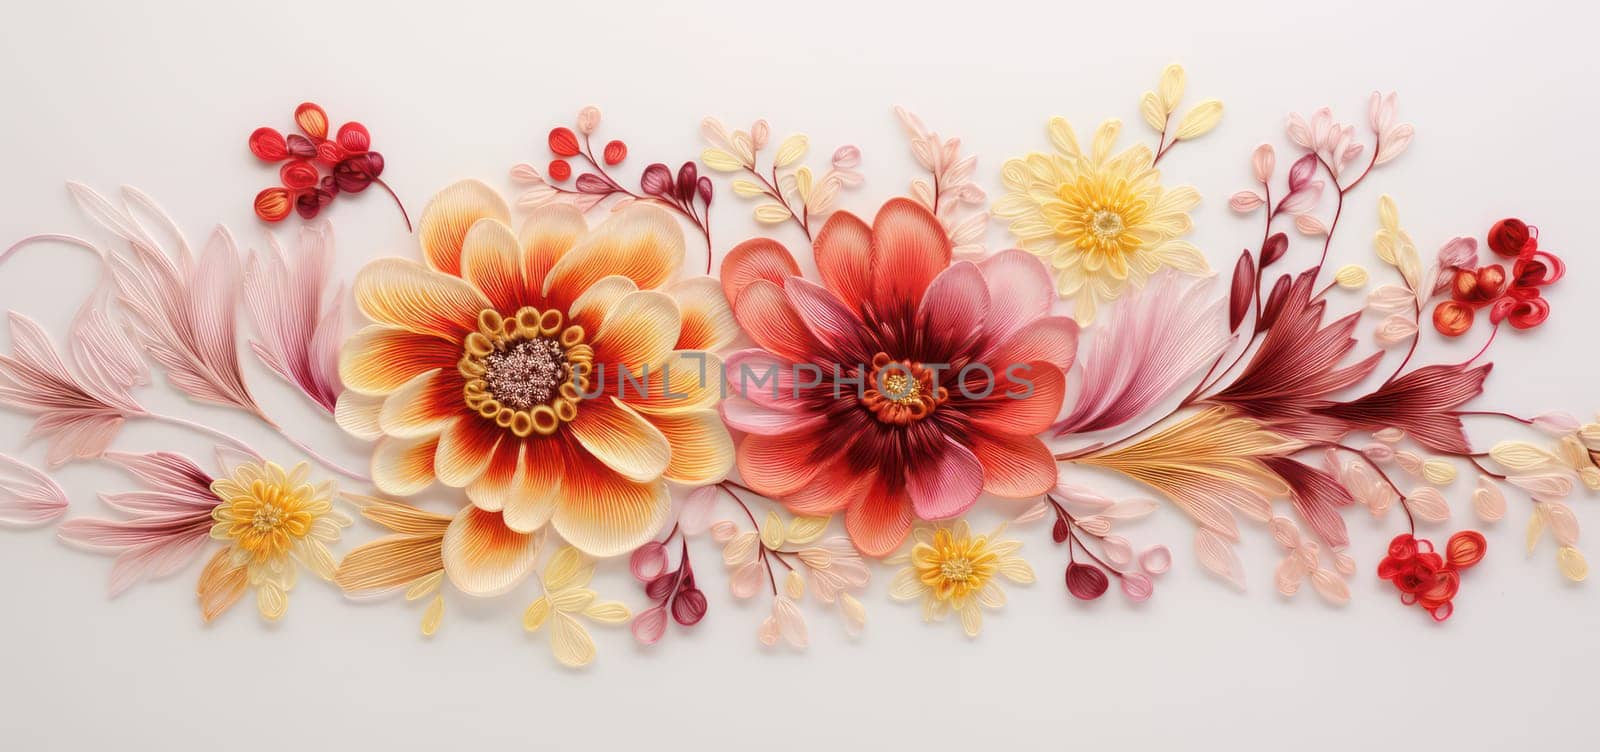 Colorful Floral Beauty on Romantic Pink Background